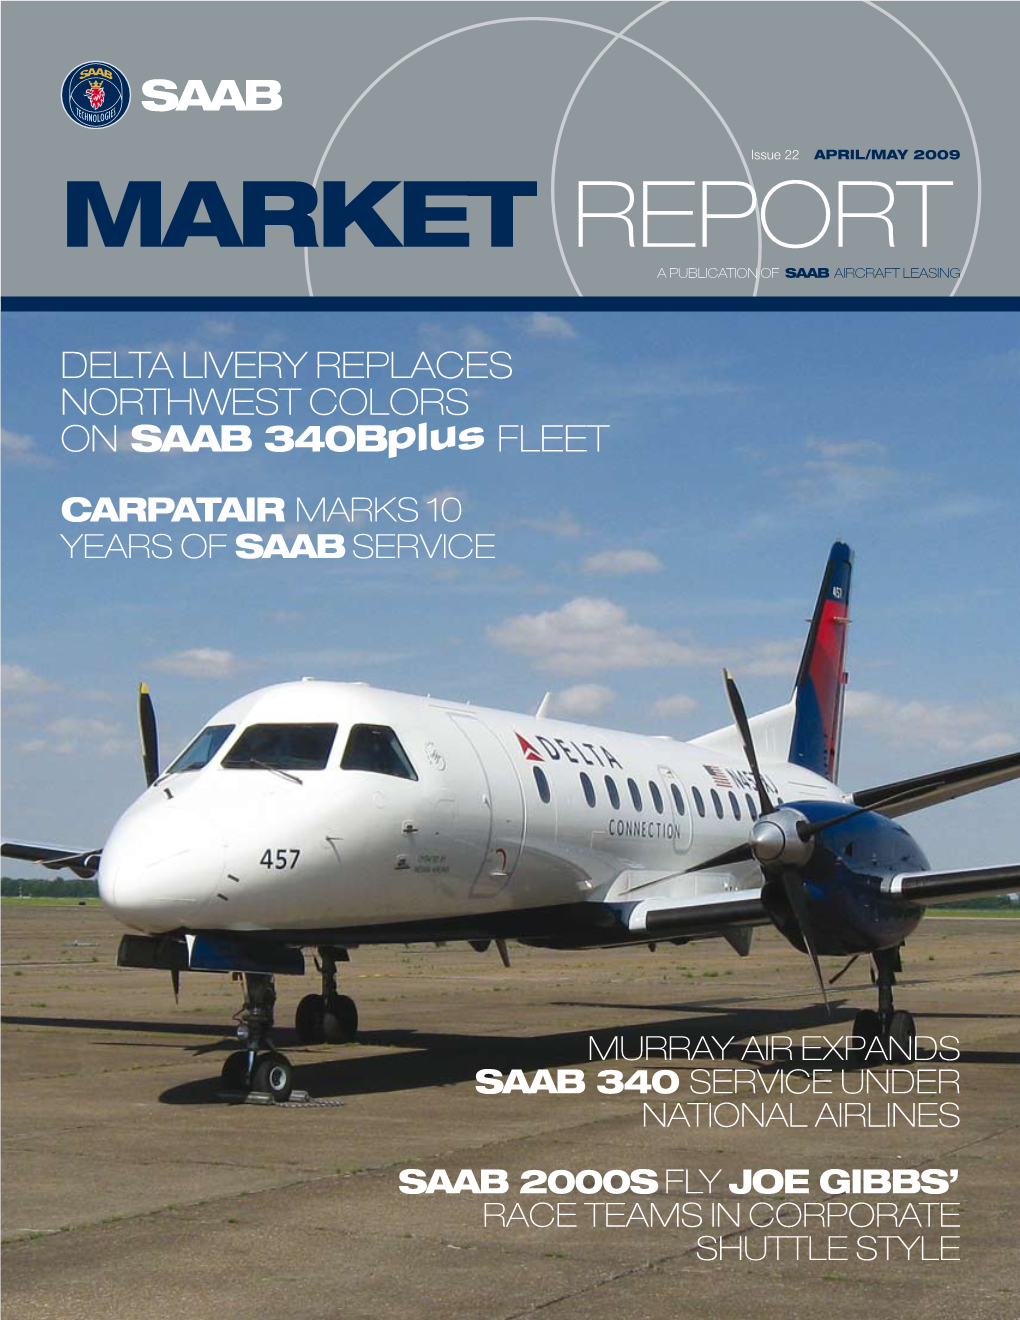 Market Report a Publication of Saab Aircraft Leasing